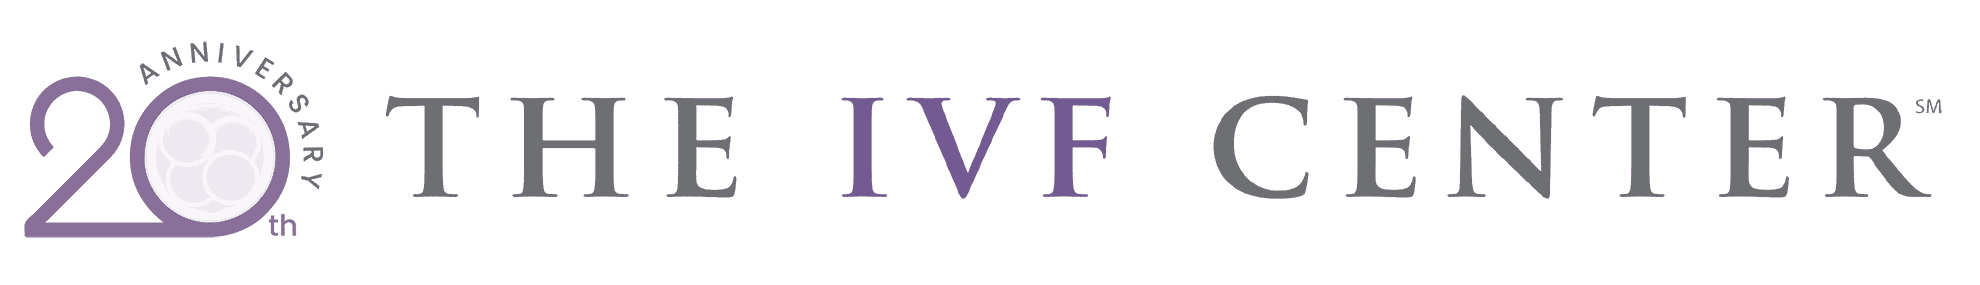 The IVF Center | Assisted Reproduction and Endocrinology Logo